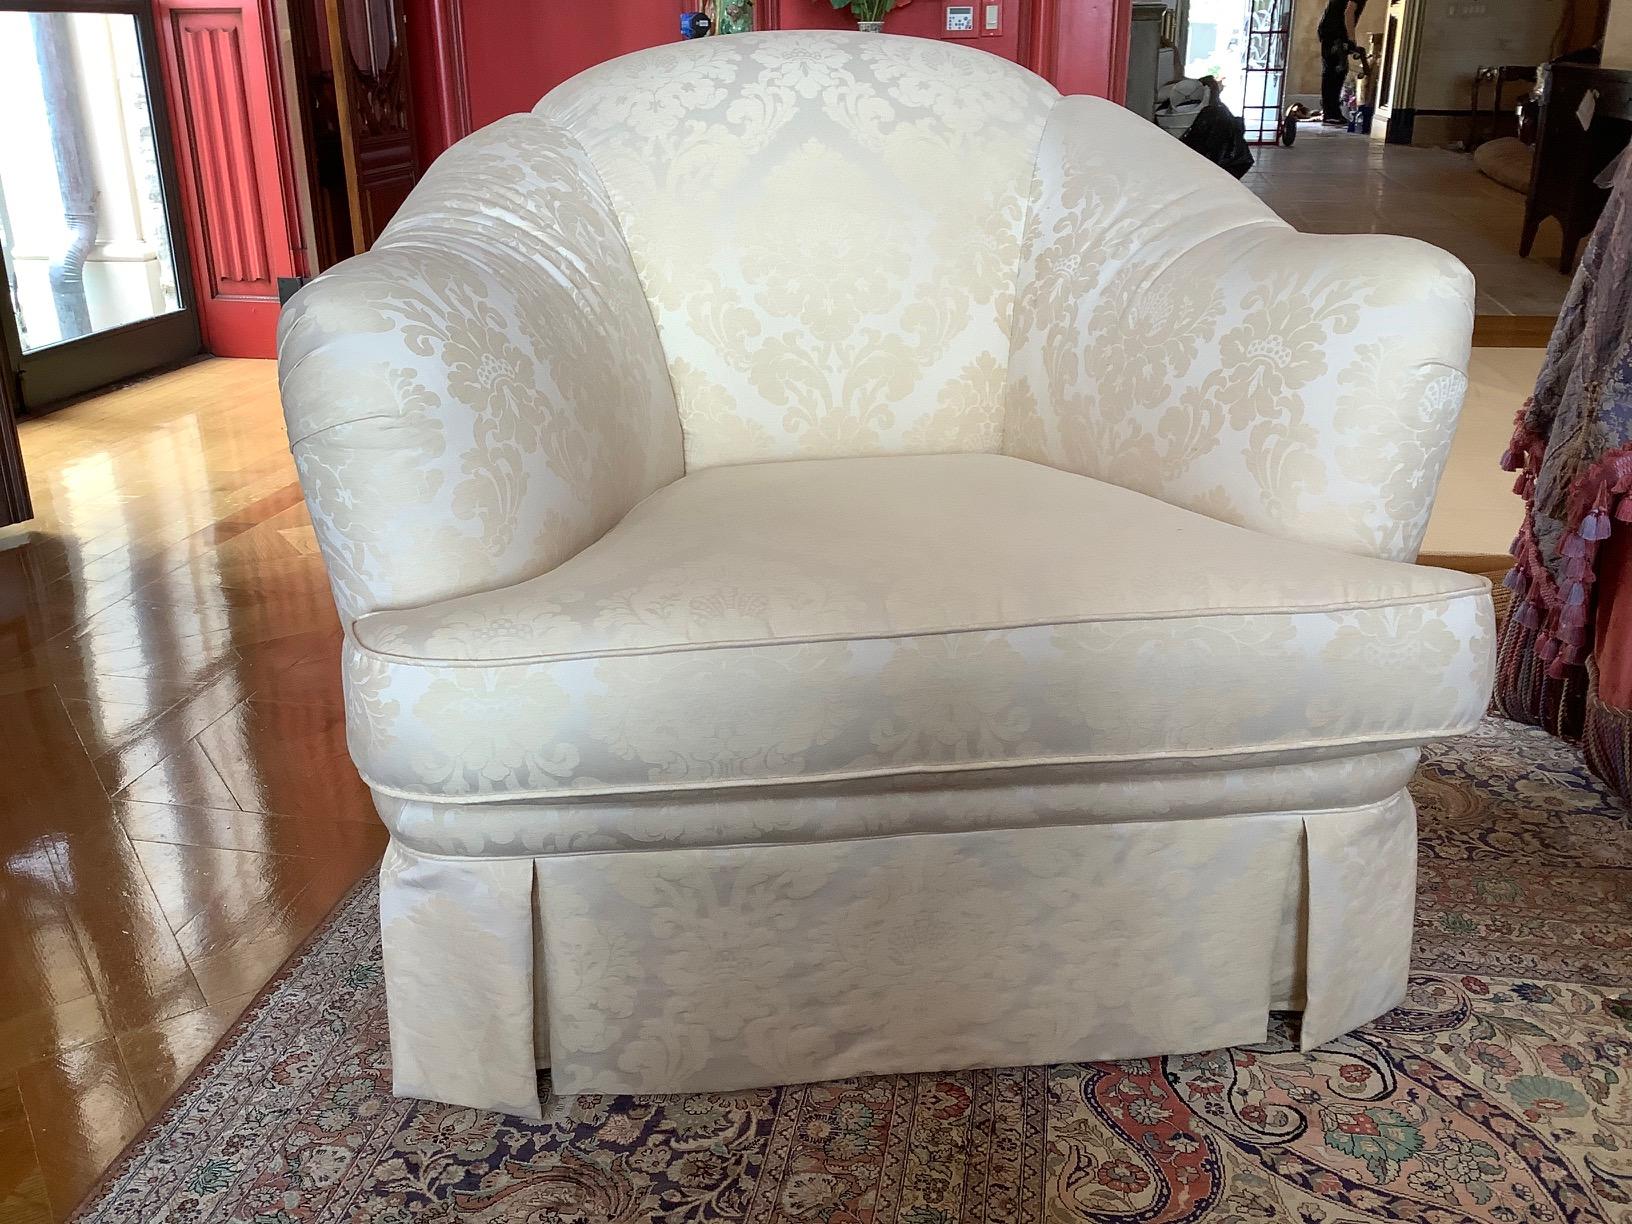 Upholstered English Scalloped Style Chair with an Ottoman, 20th Century For Sale 1